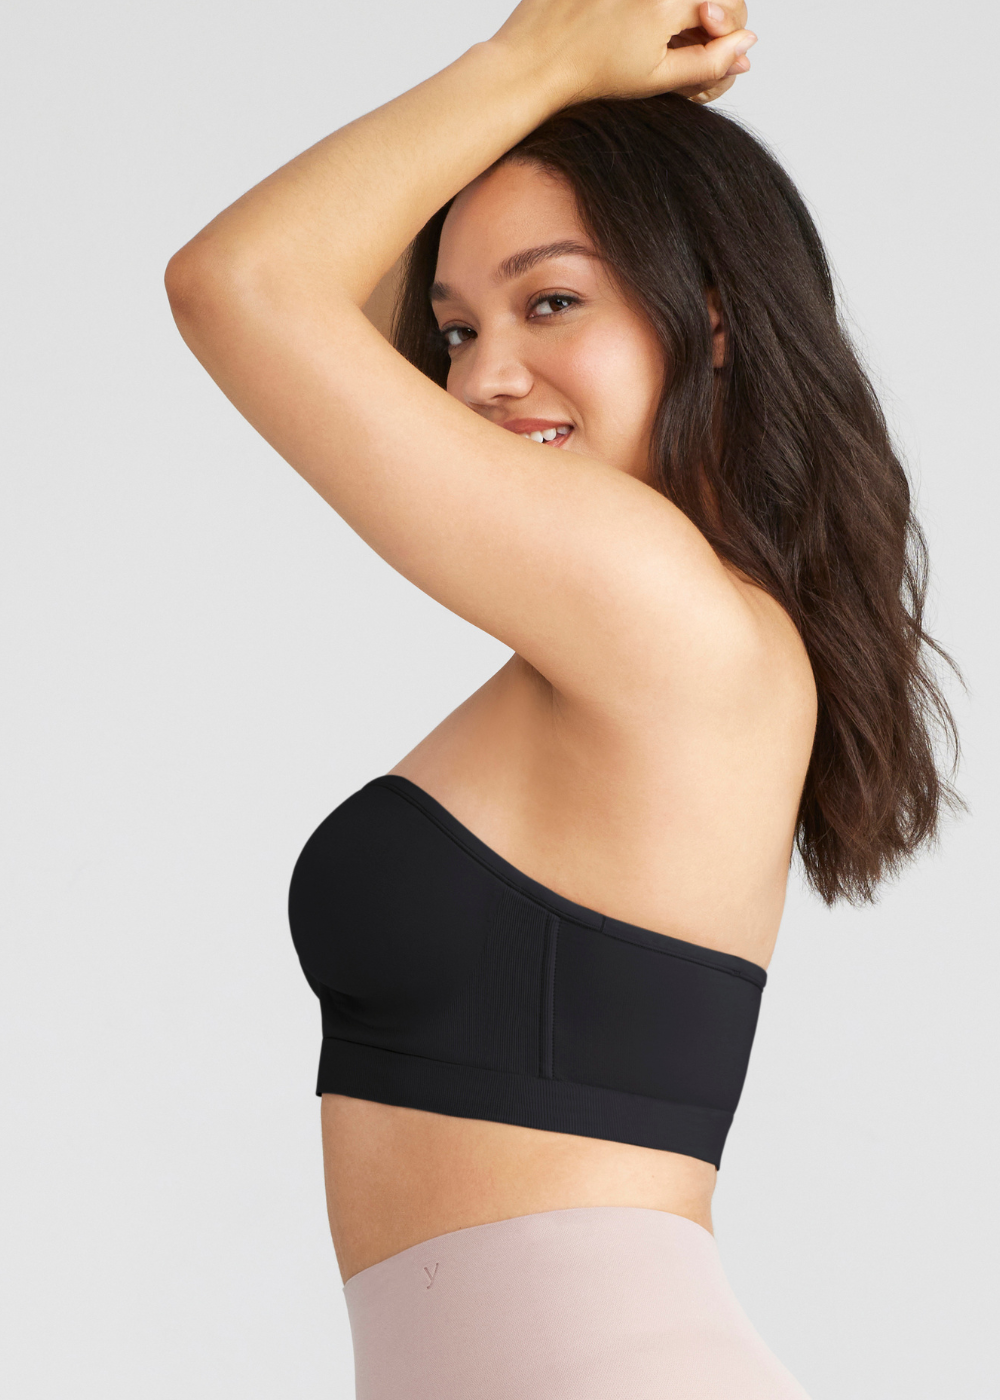 Yummie Convertible Bralette, Black, Size L/XL, from Soma